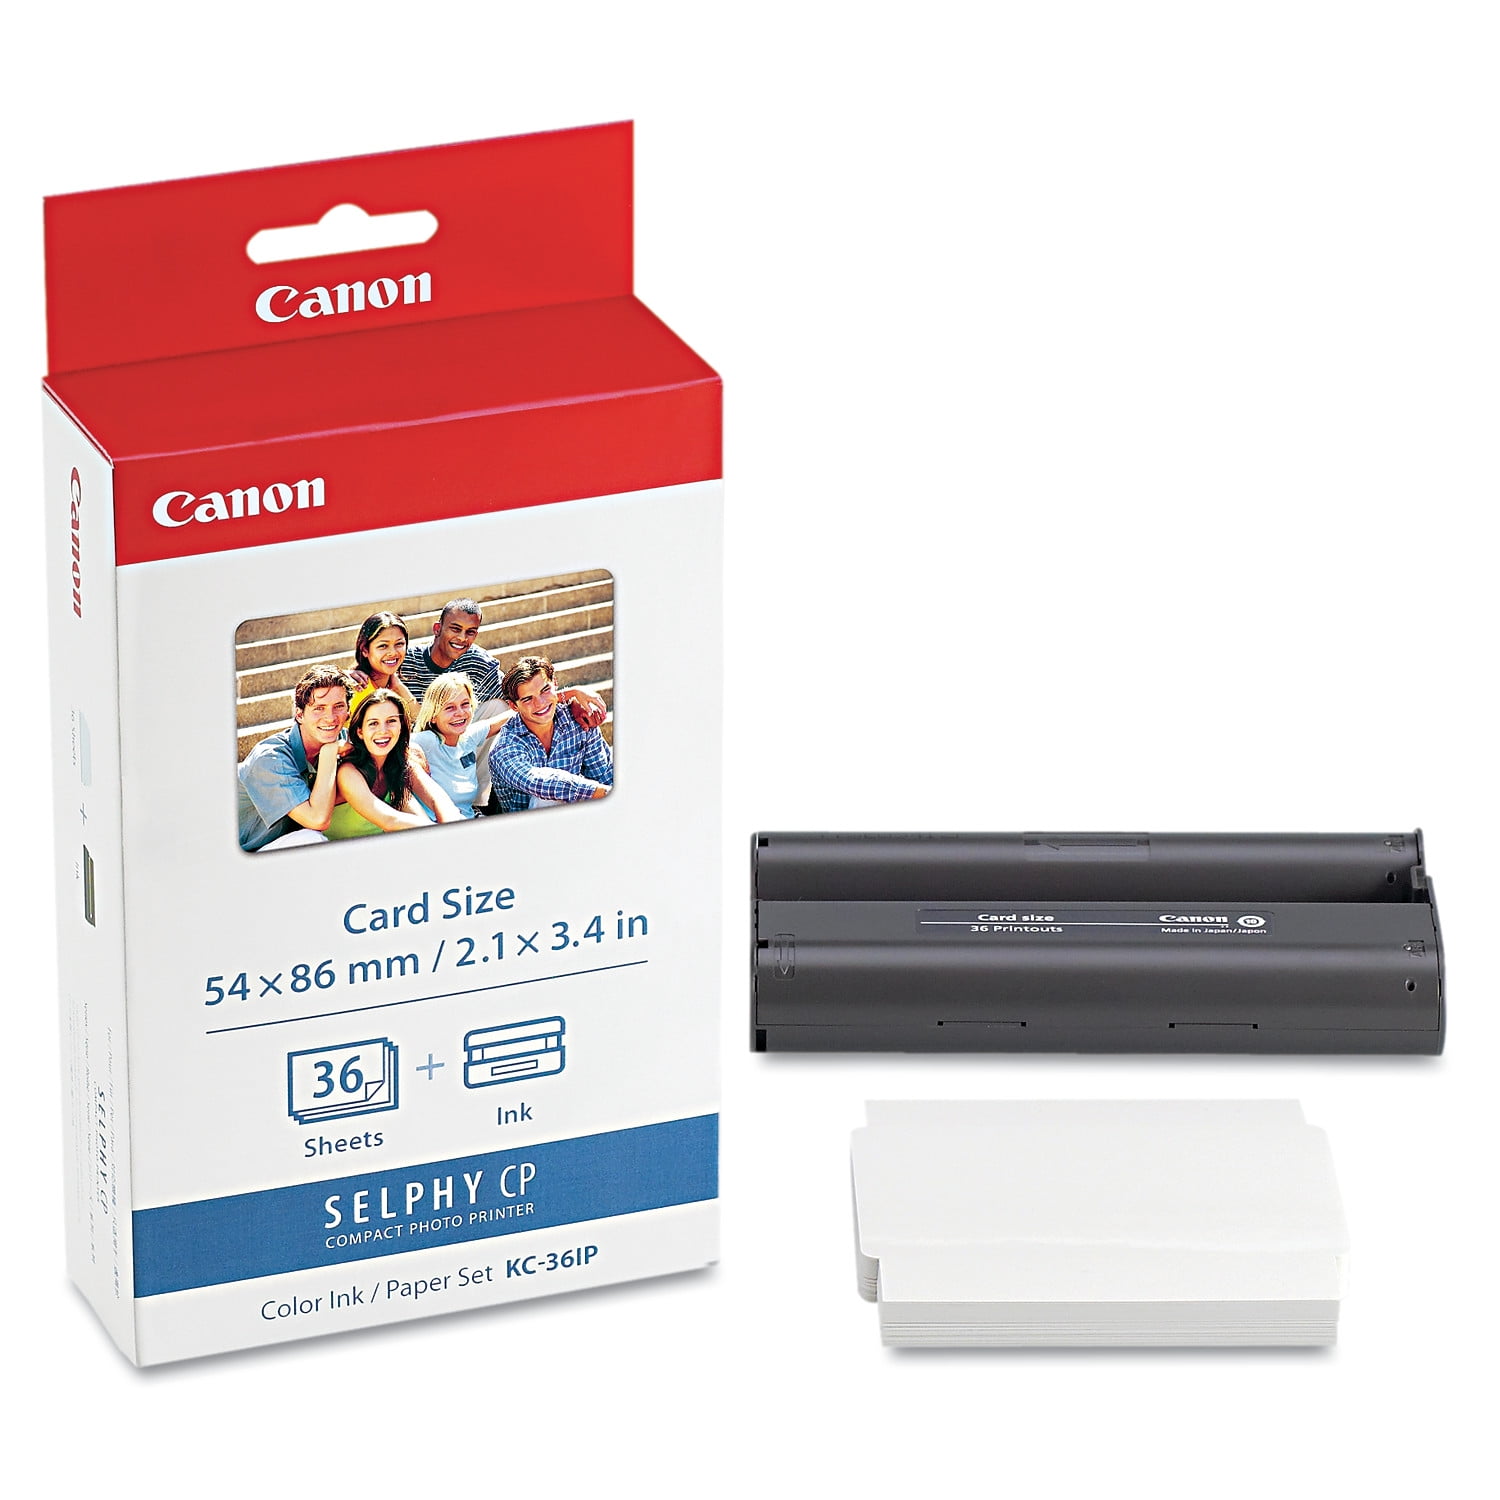 2 Pack Canon KP-36IP Color Ink/Paper Set 7737A001 2 - Adorama